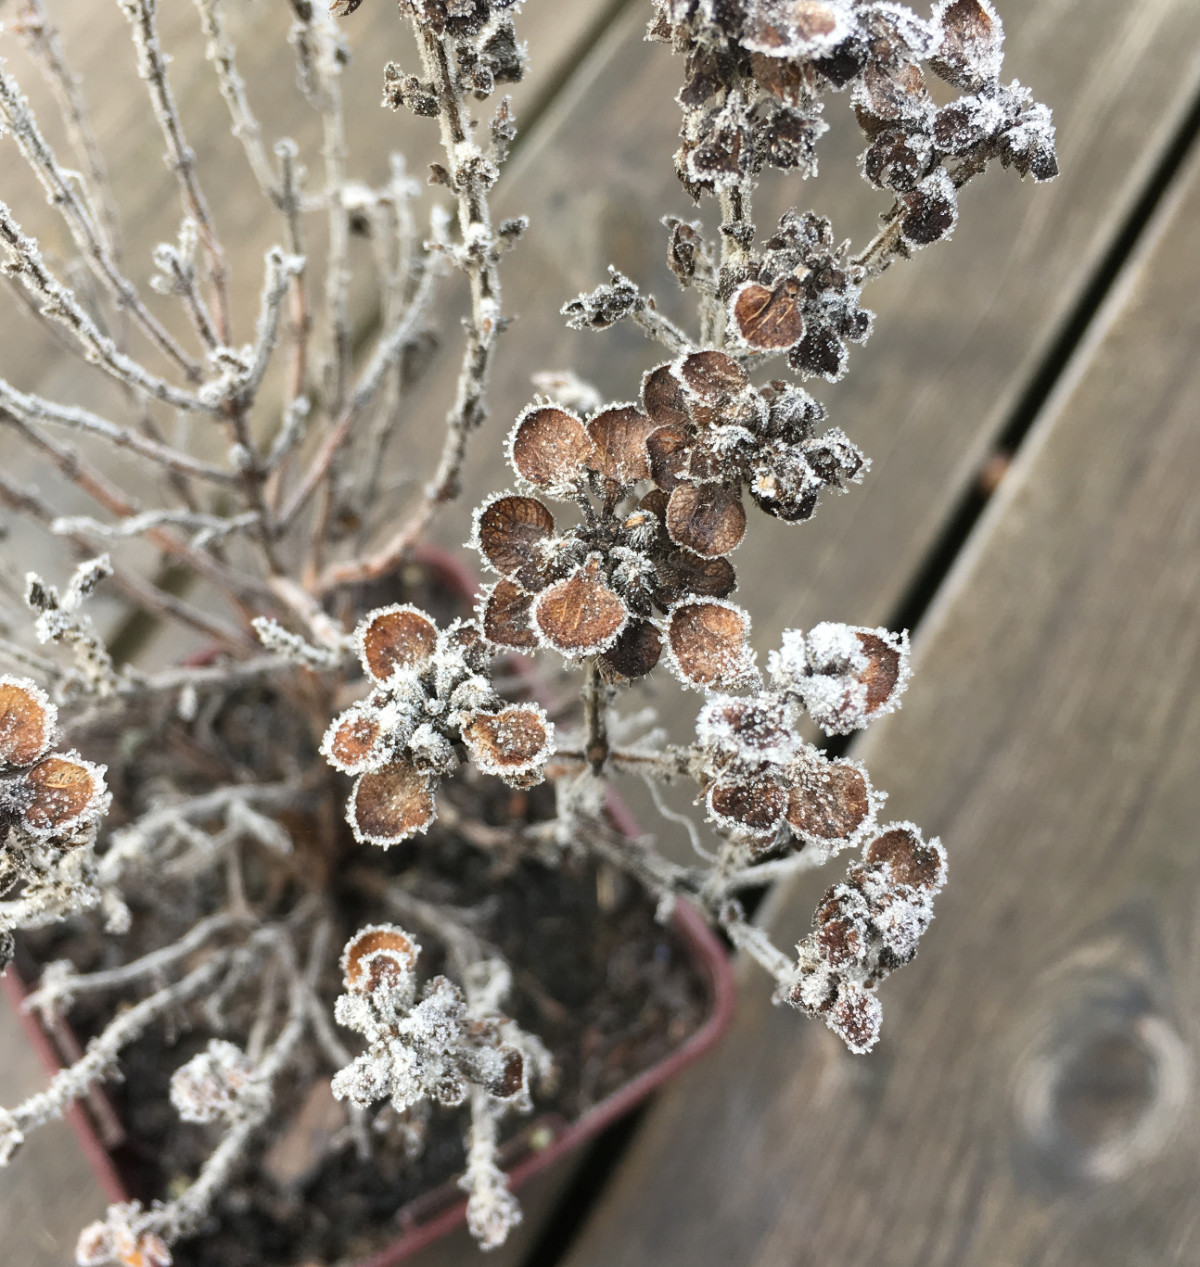 Ikebana and wabi sabi - delicate frost crystals on wintry stalks and tiny, round, brown leaves